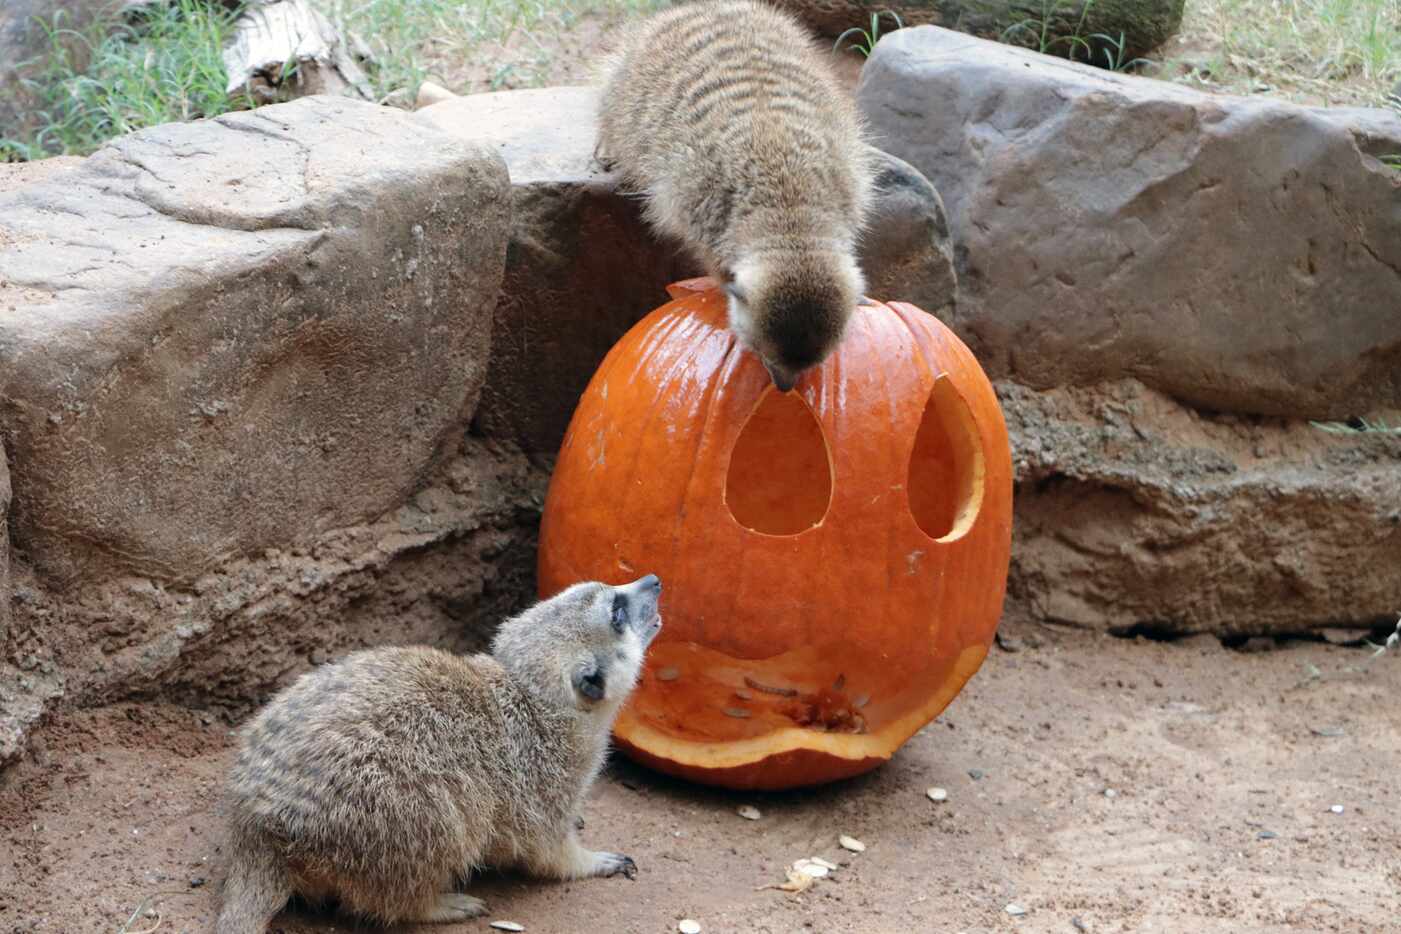 The Dallas Zoo's meerkats enjoy a pumpkin treat with worms in celebration of Halloween on...